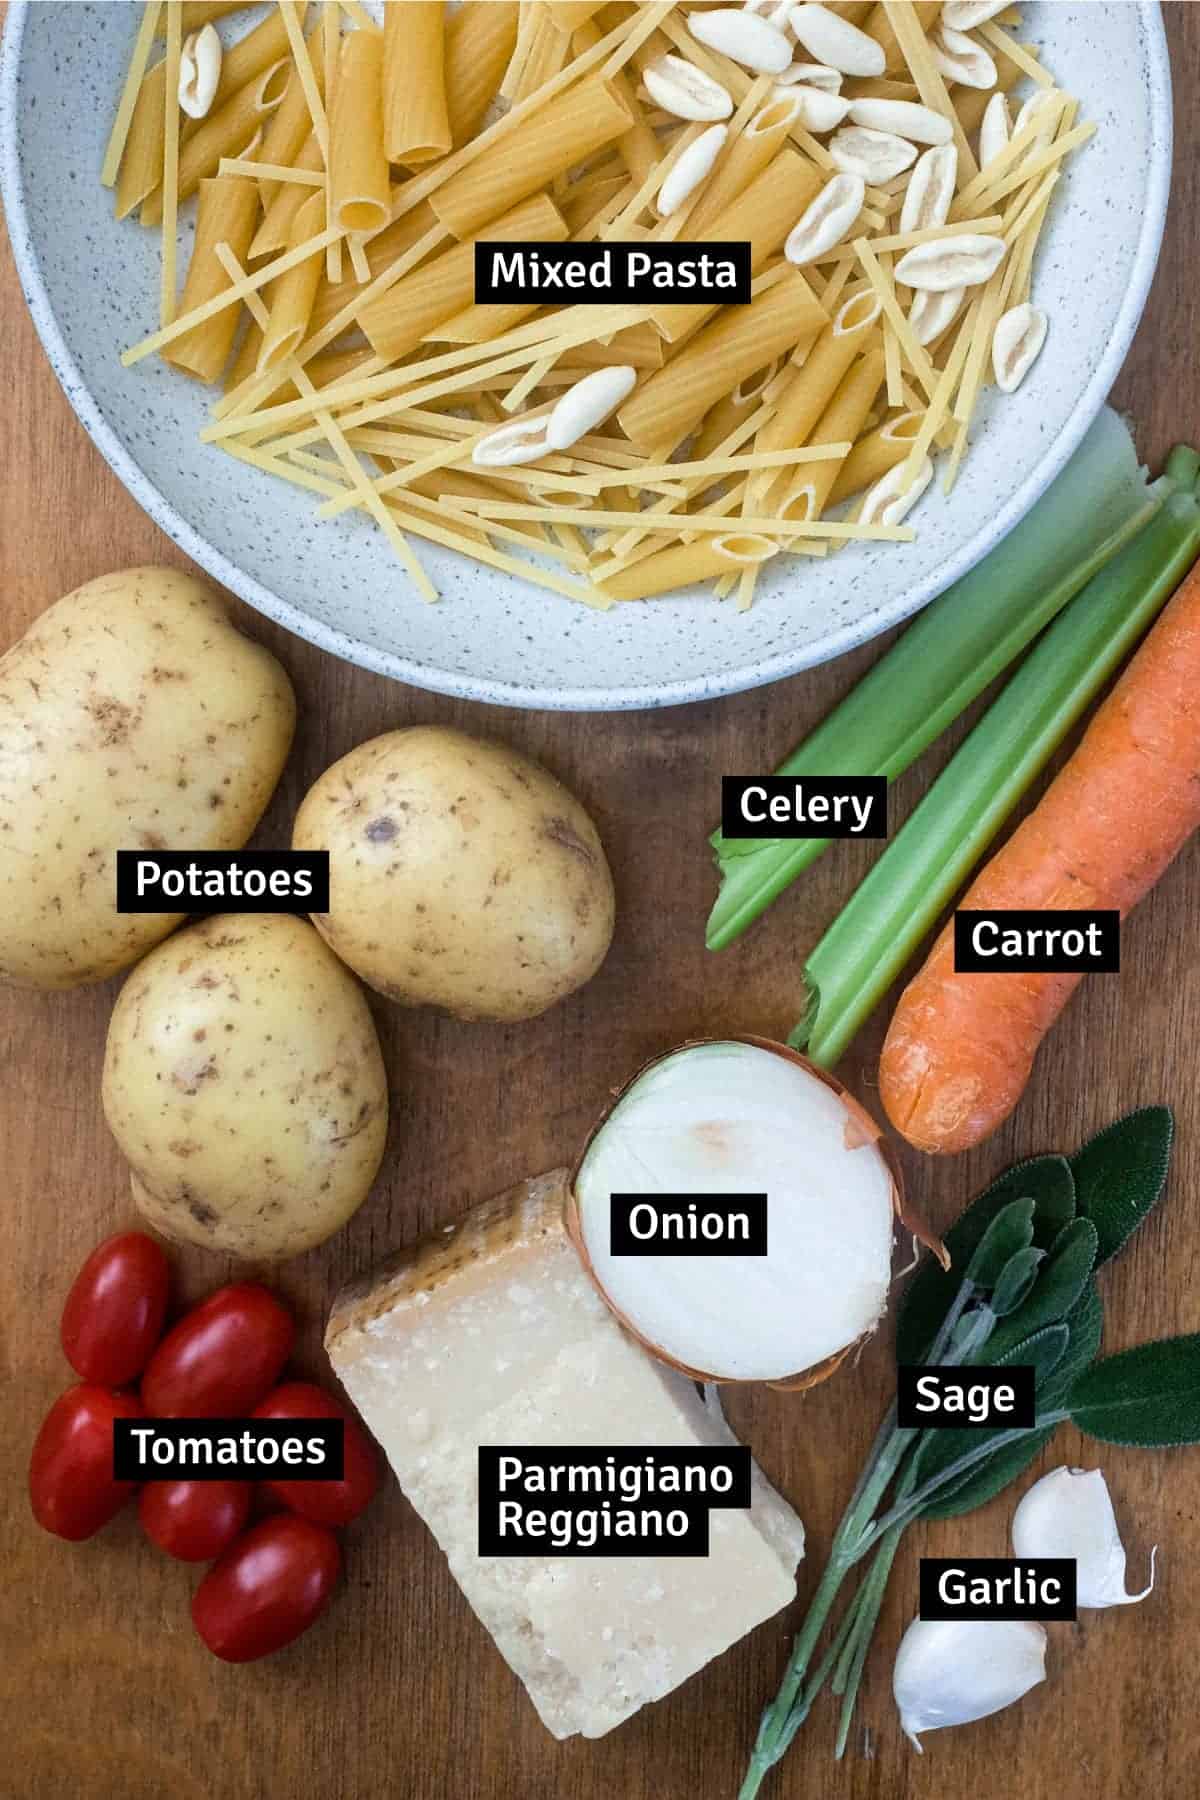 All the ingredients for Pasta with Potatoes (Pasta e Patate) on a wooden surface.